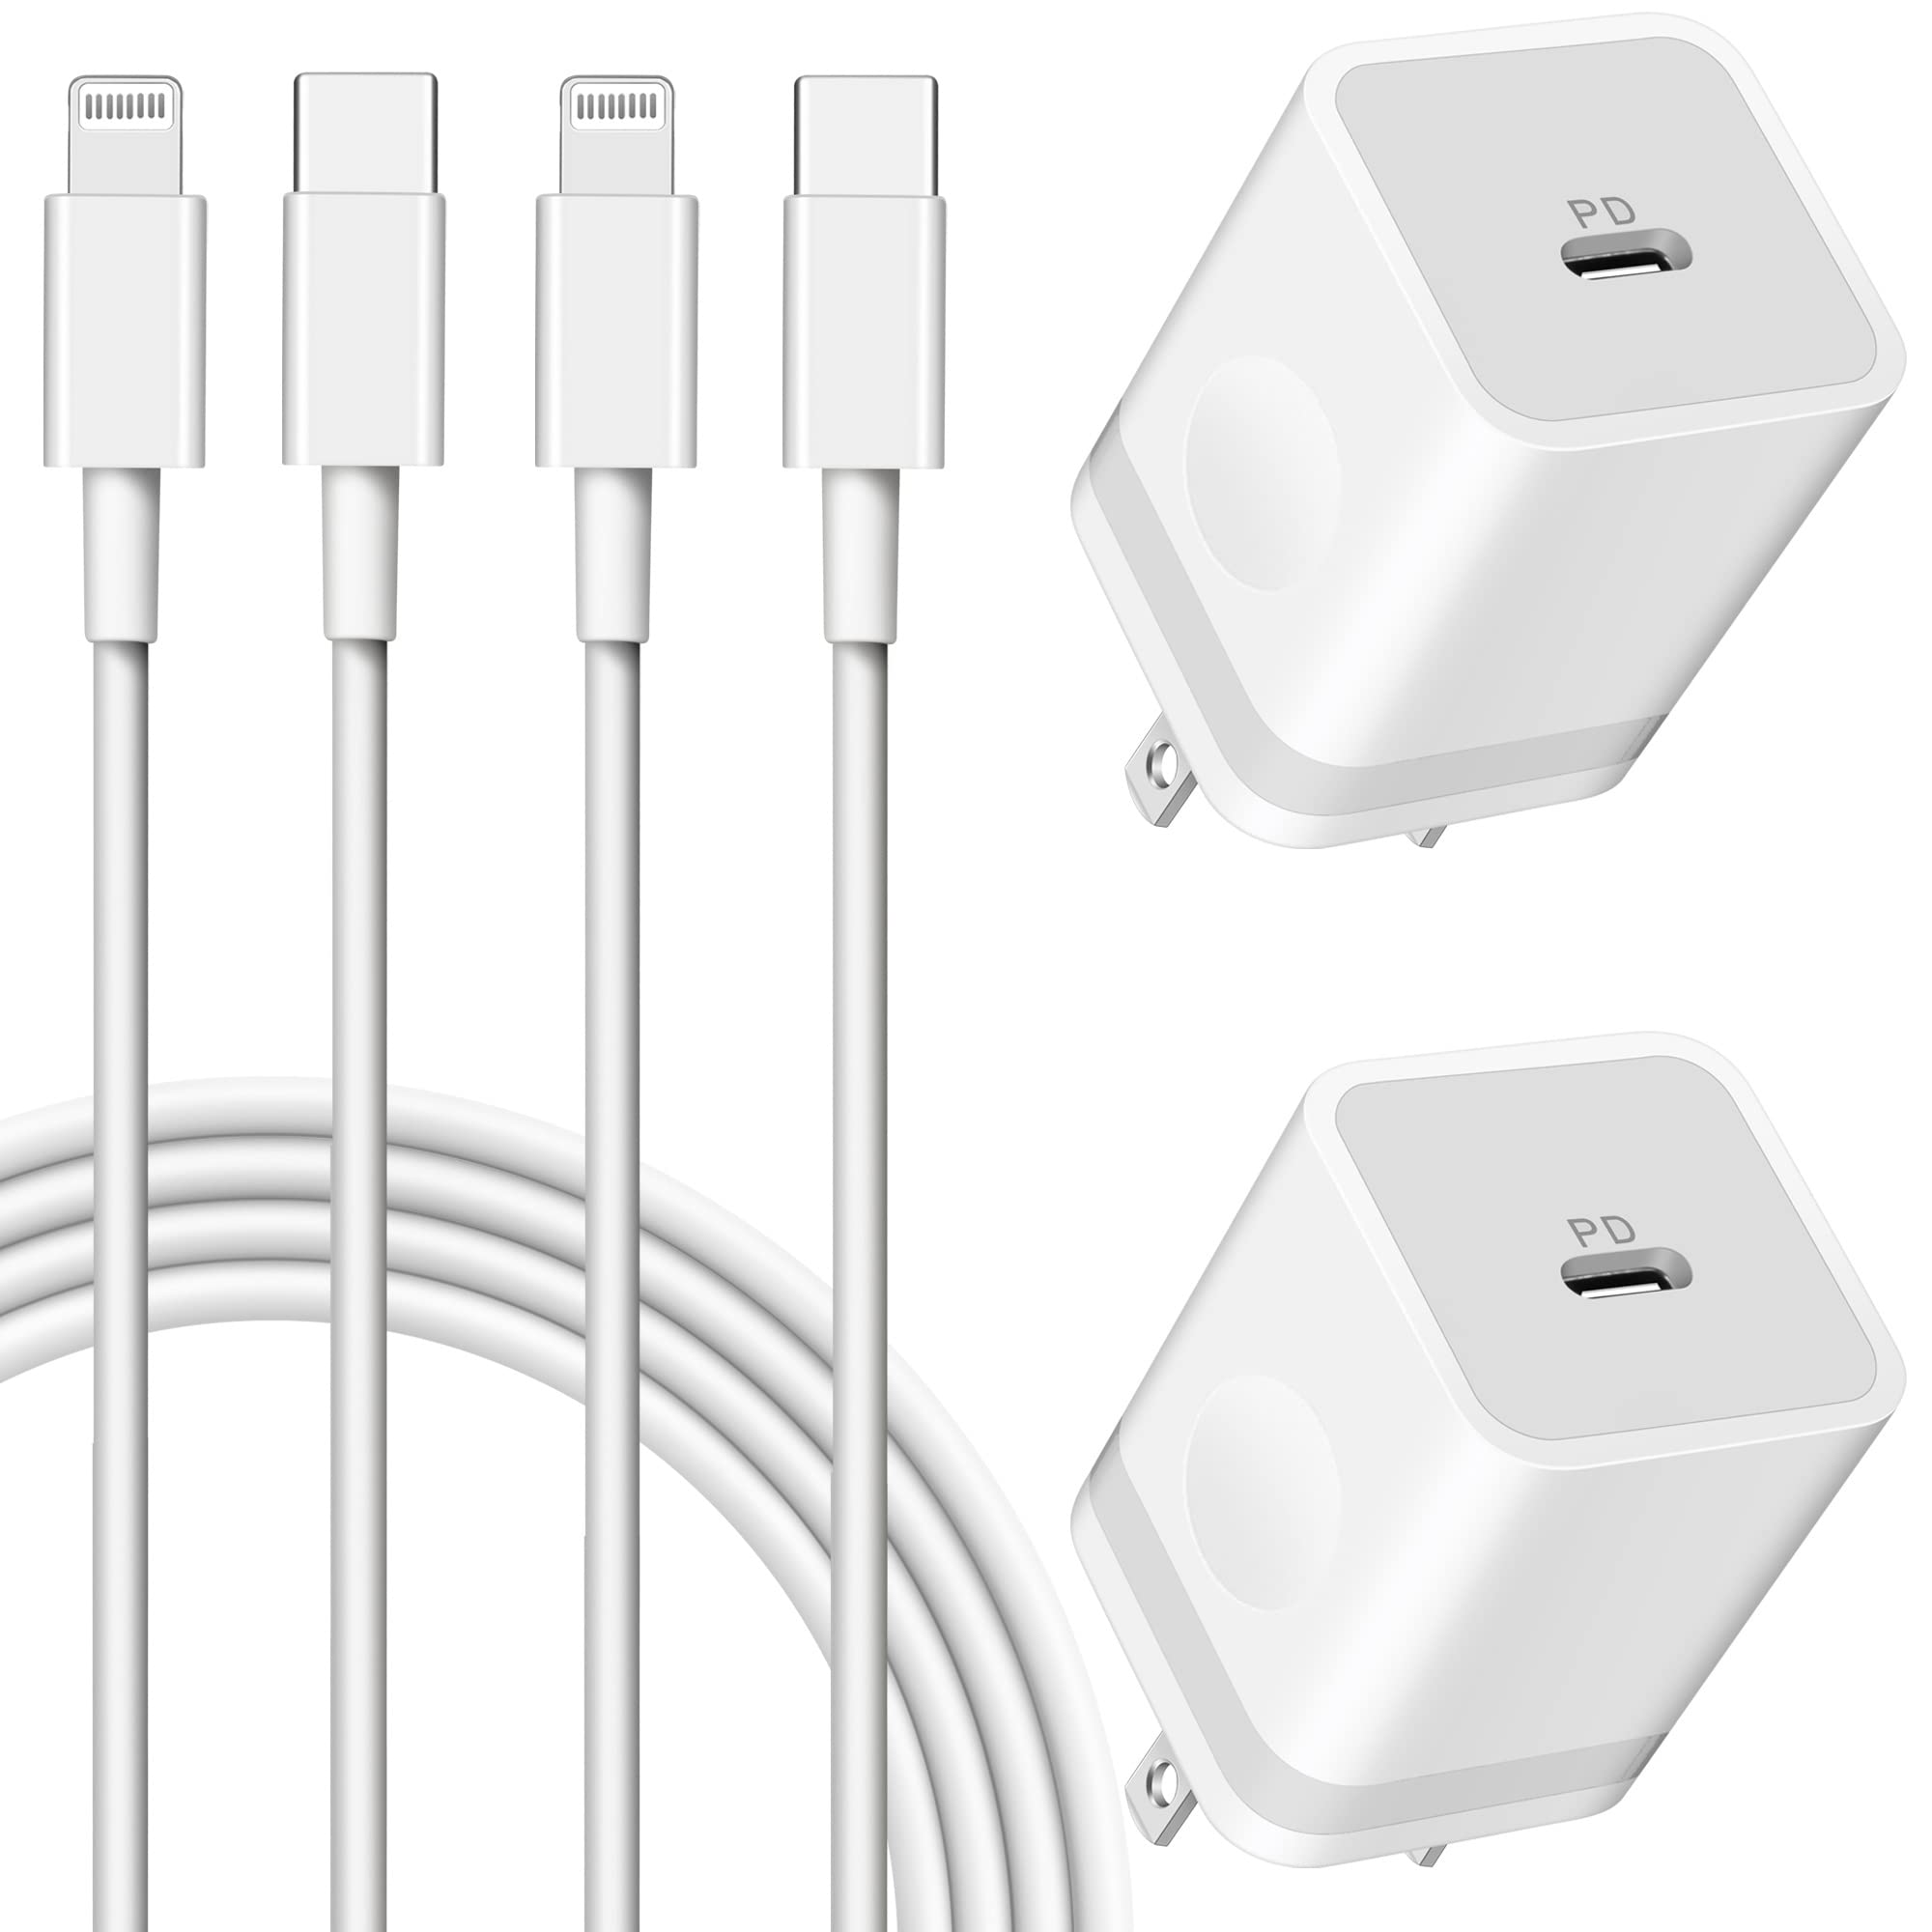 iPhone 14 Charger Fast Charging [Apple MFi Certified], LUOSIKE 2-Pack 20W USB C Wall Charger Block Power Adapter Plug with 2 X 6FT Lightning Cable for iPhone 14 Pro Max Mini 13 12 11 XS XR X, iPad